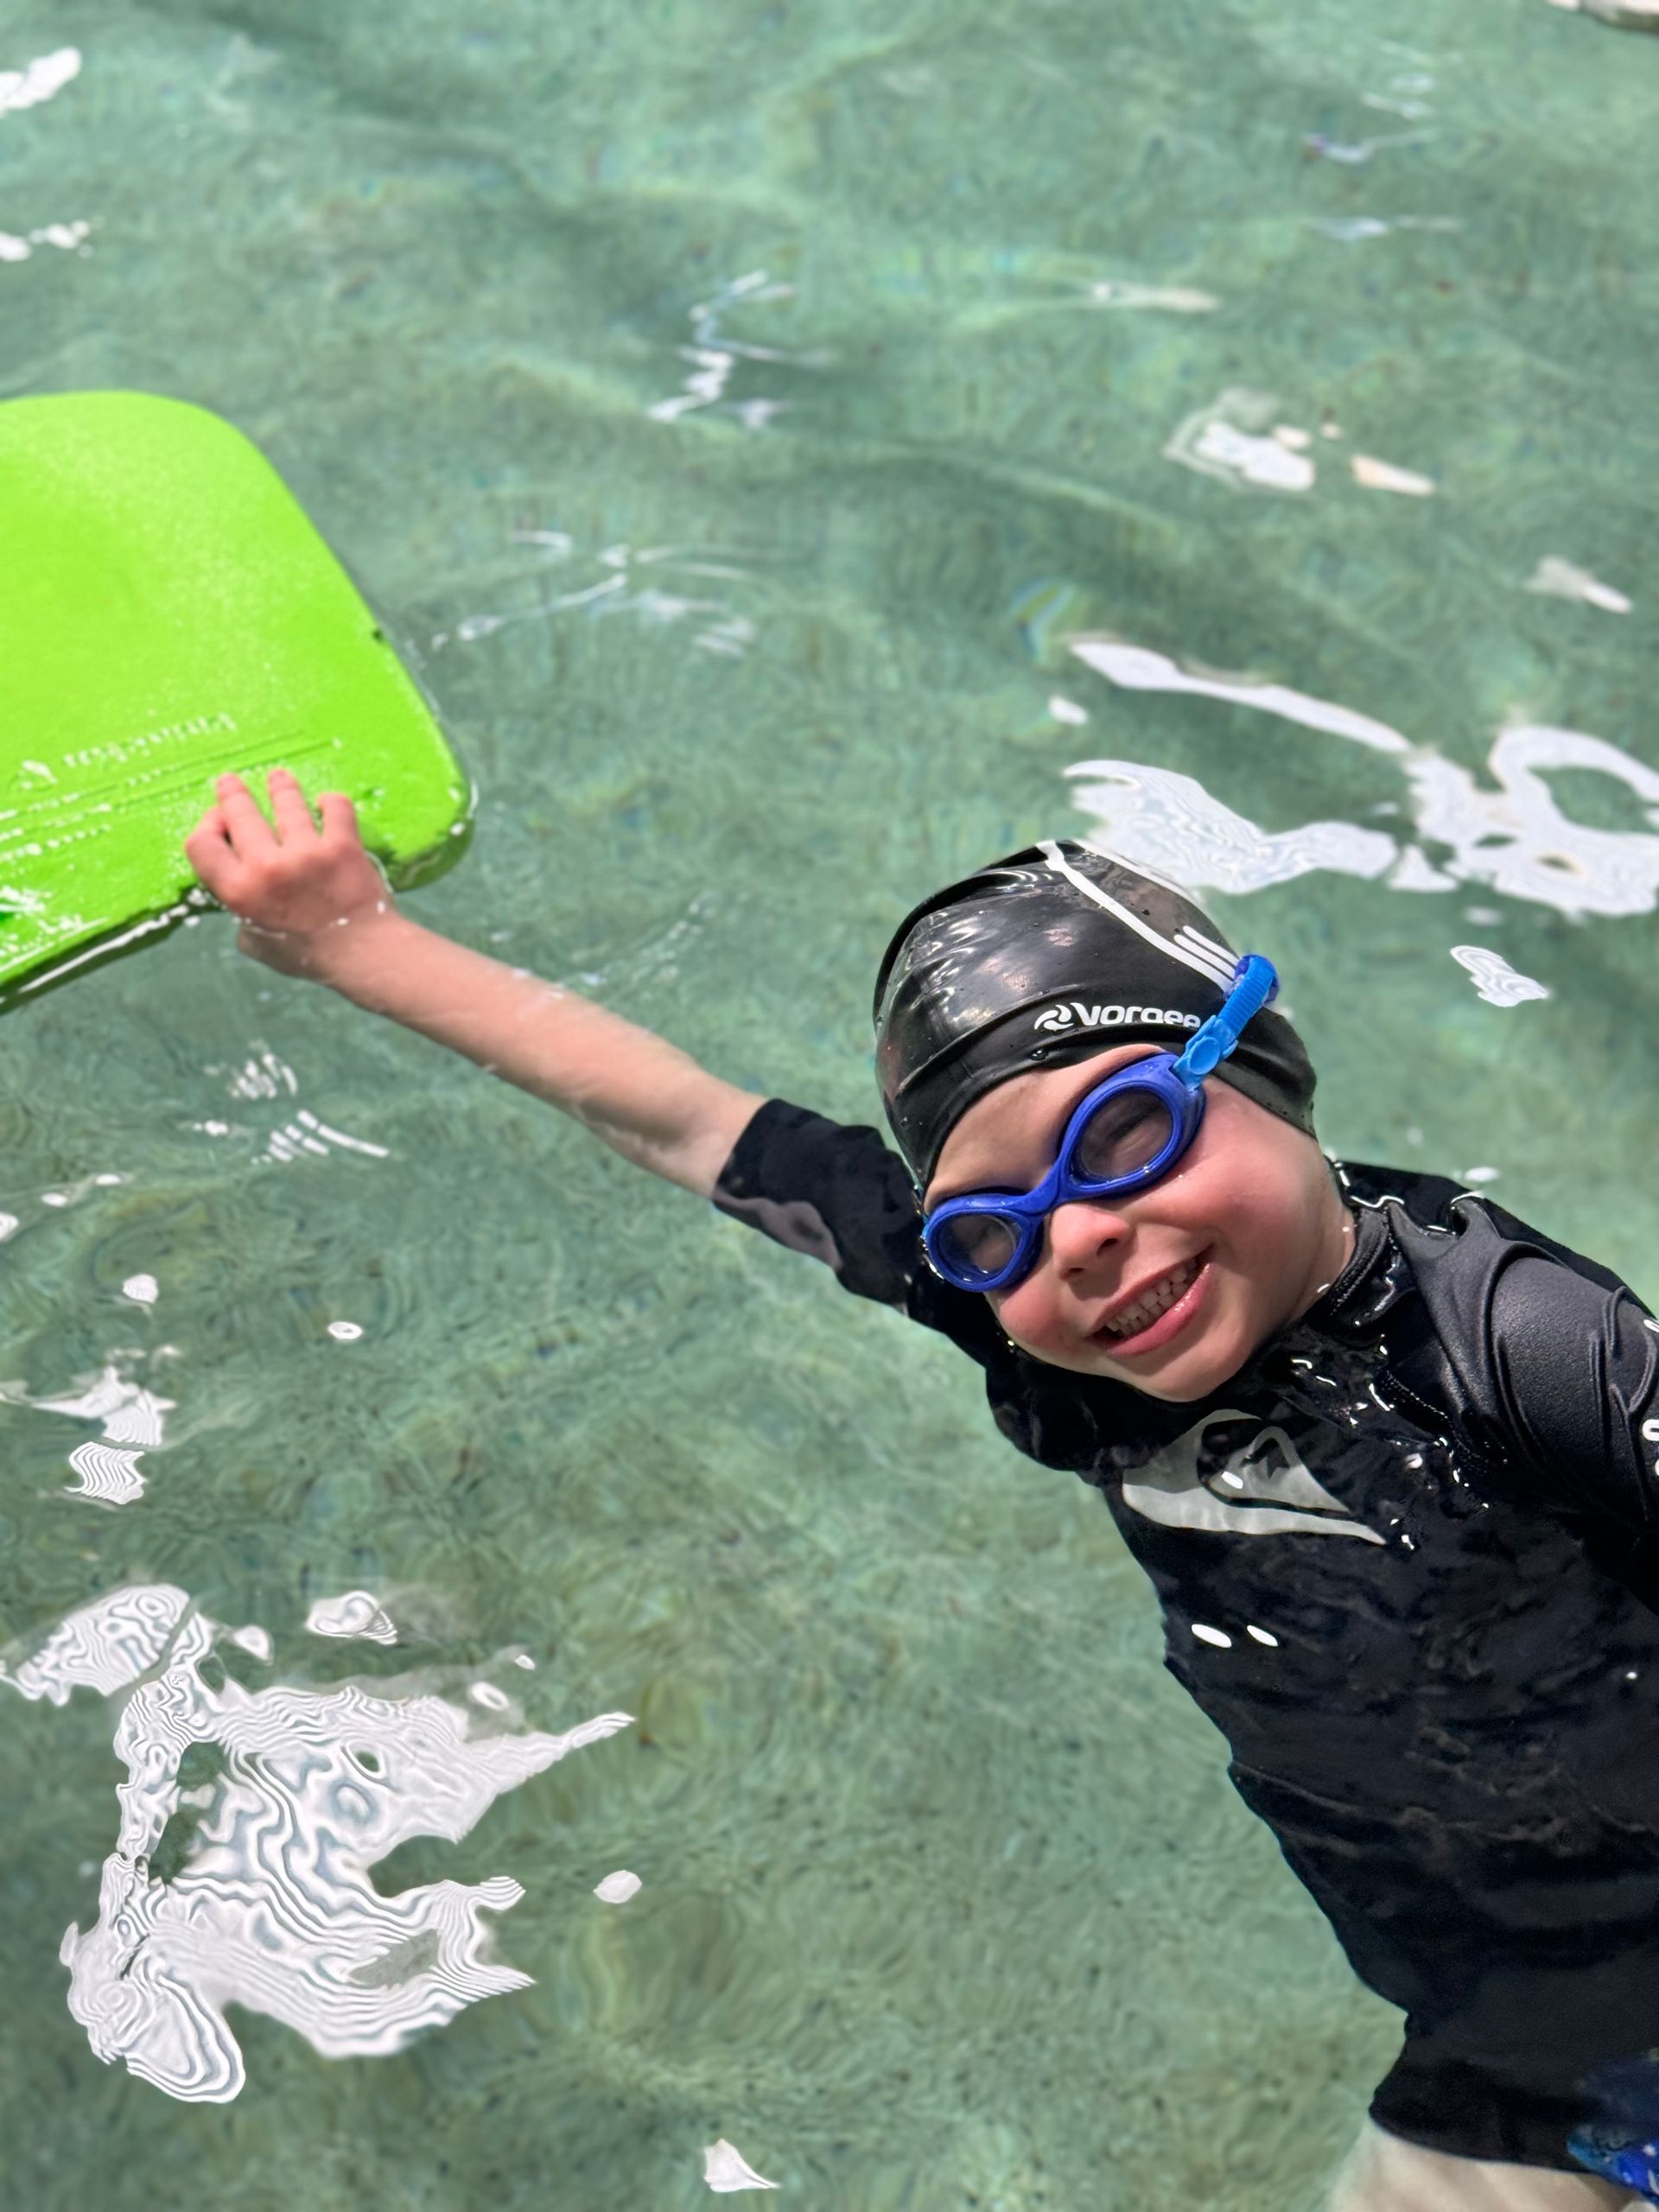 A young boy wearing goggles and a swim cap is holding a green boogie board in the water.